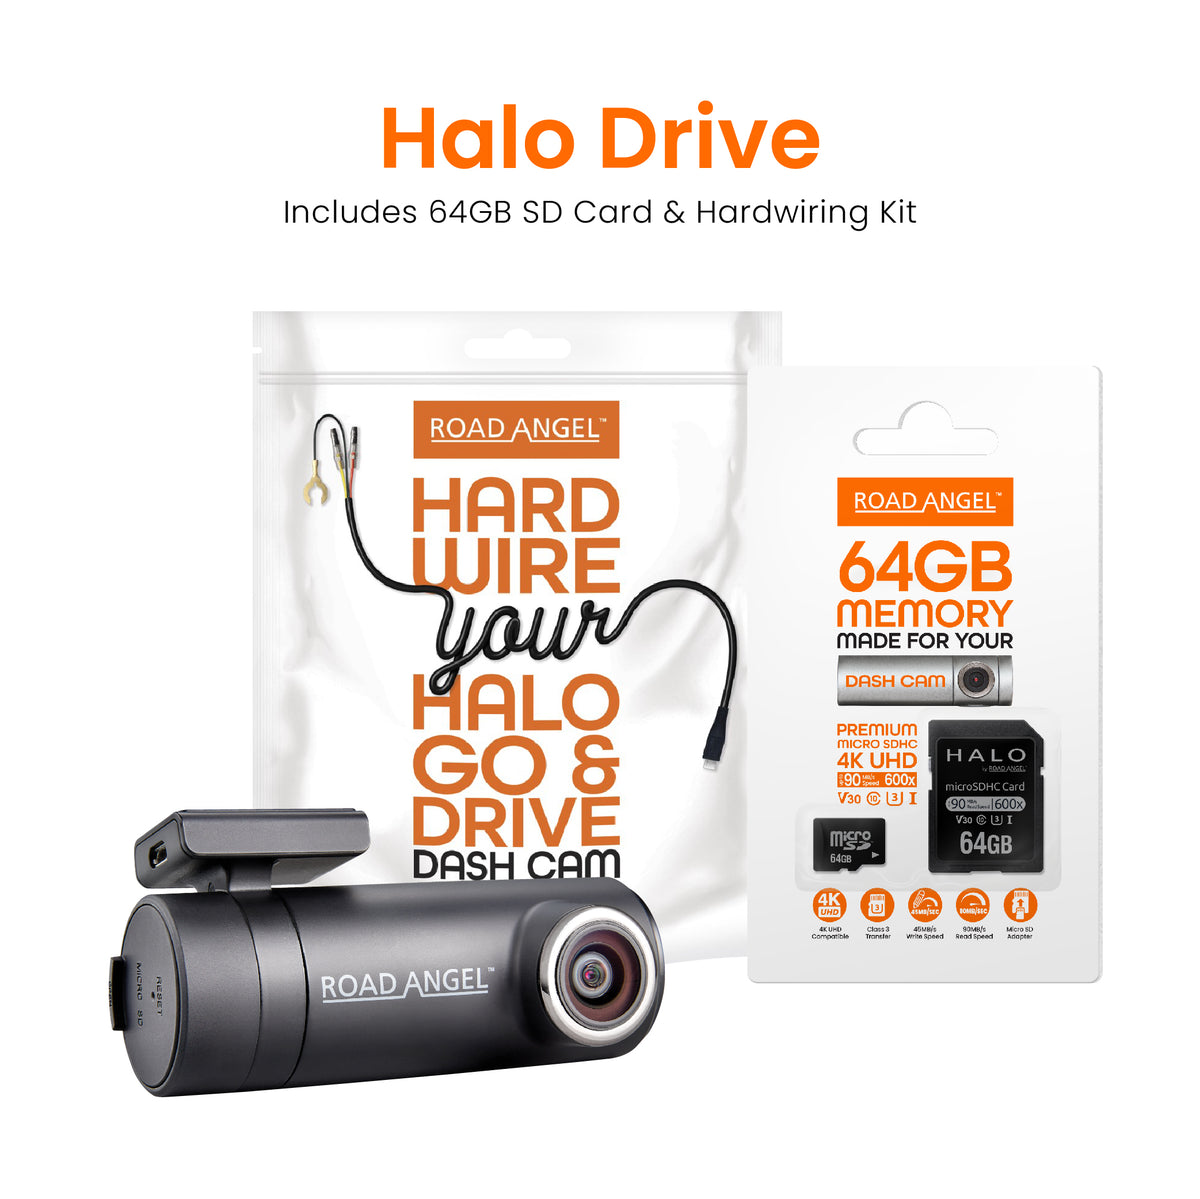 Road Angel Halo Drive 2K Compact Dash Cam with SD Card & Hardwiring Kit Bundle